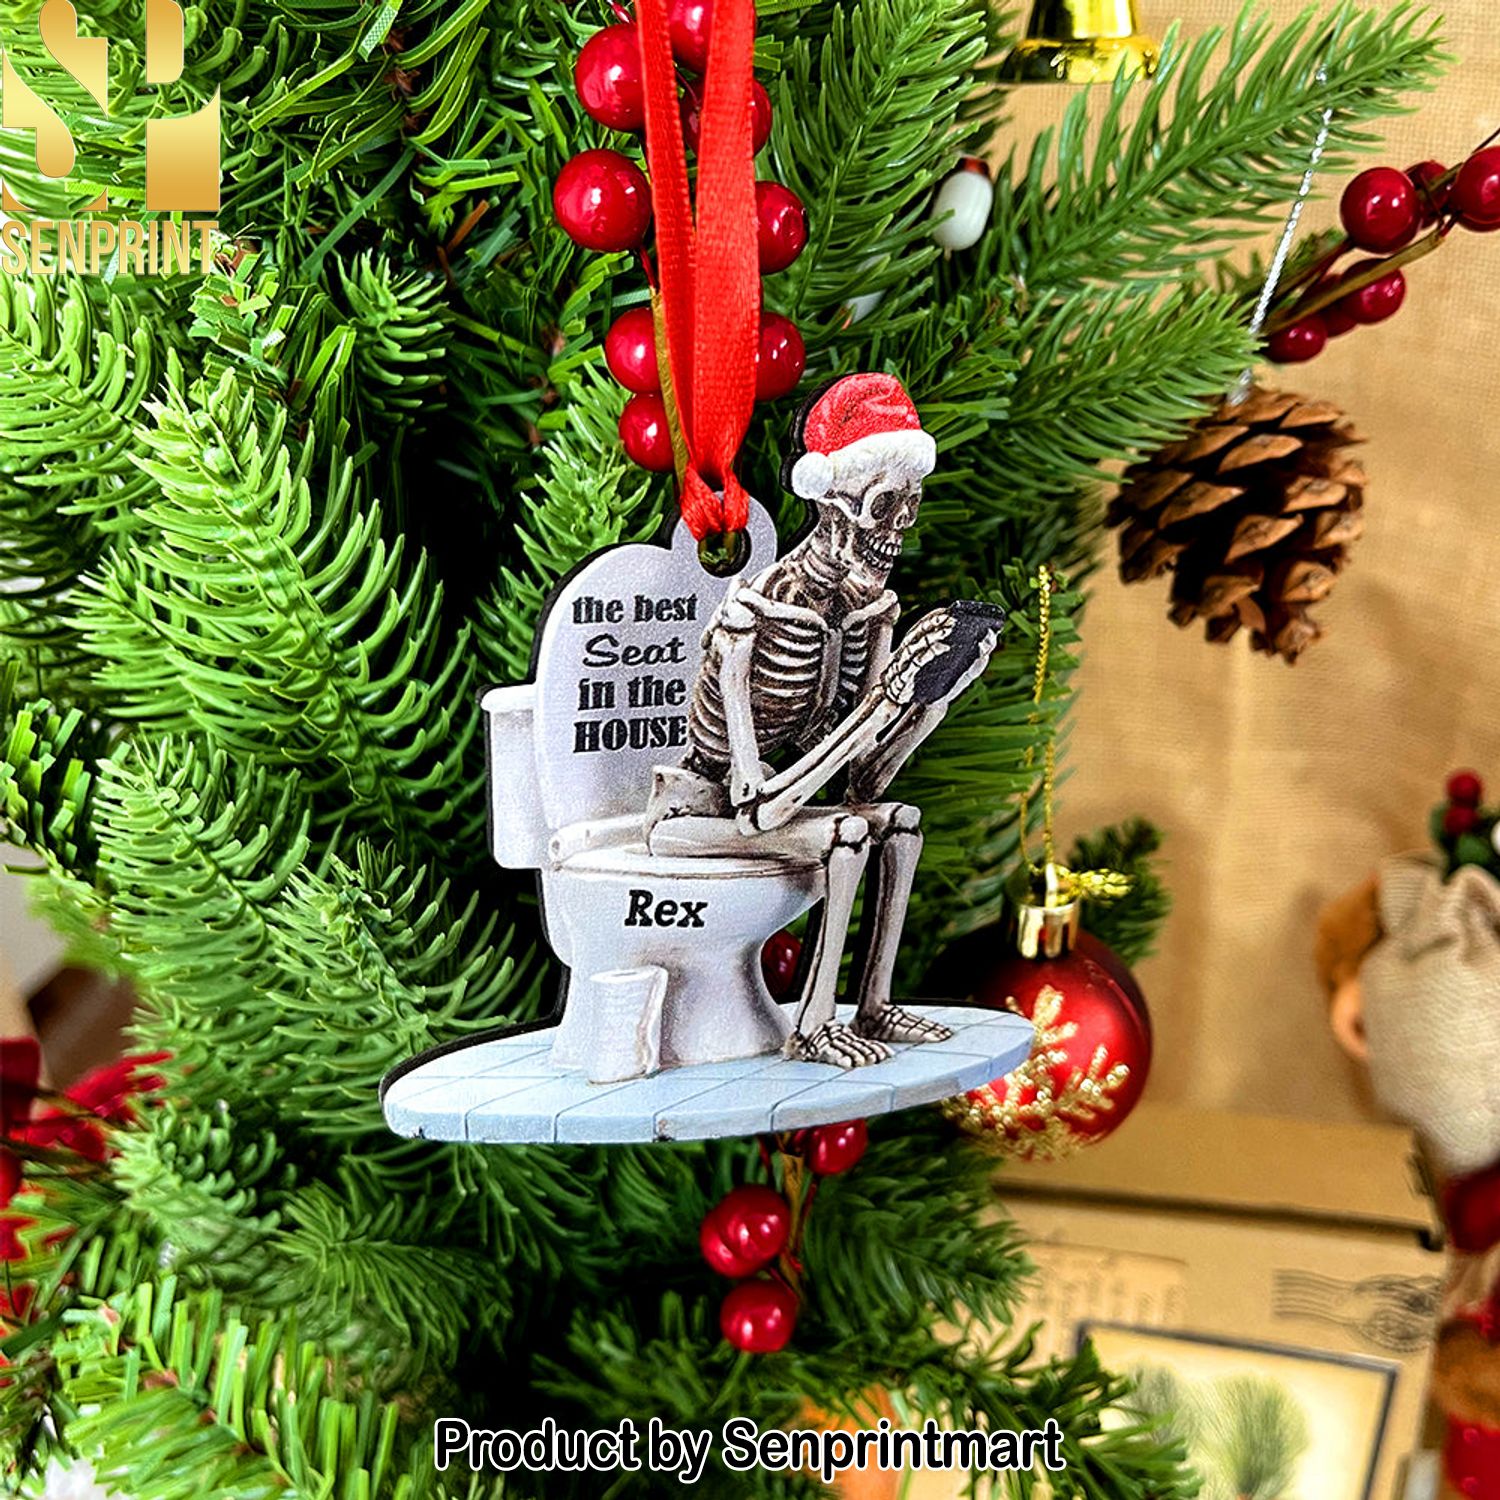 The Best Seat In The House, Personalized Funny Skull Ornament, Gift For Christmas